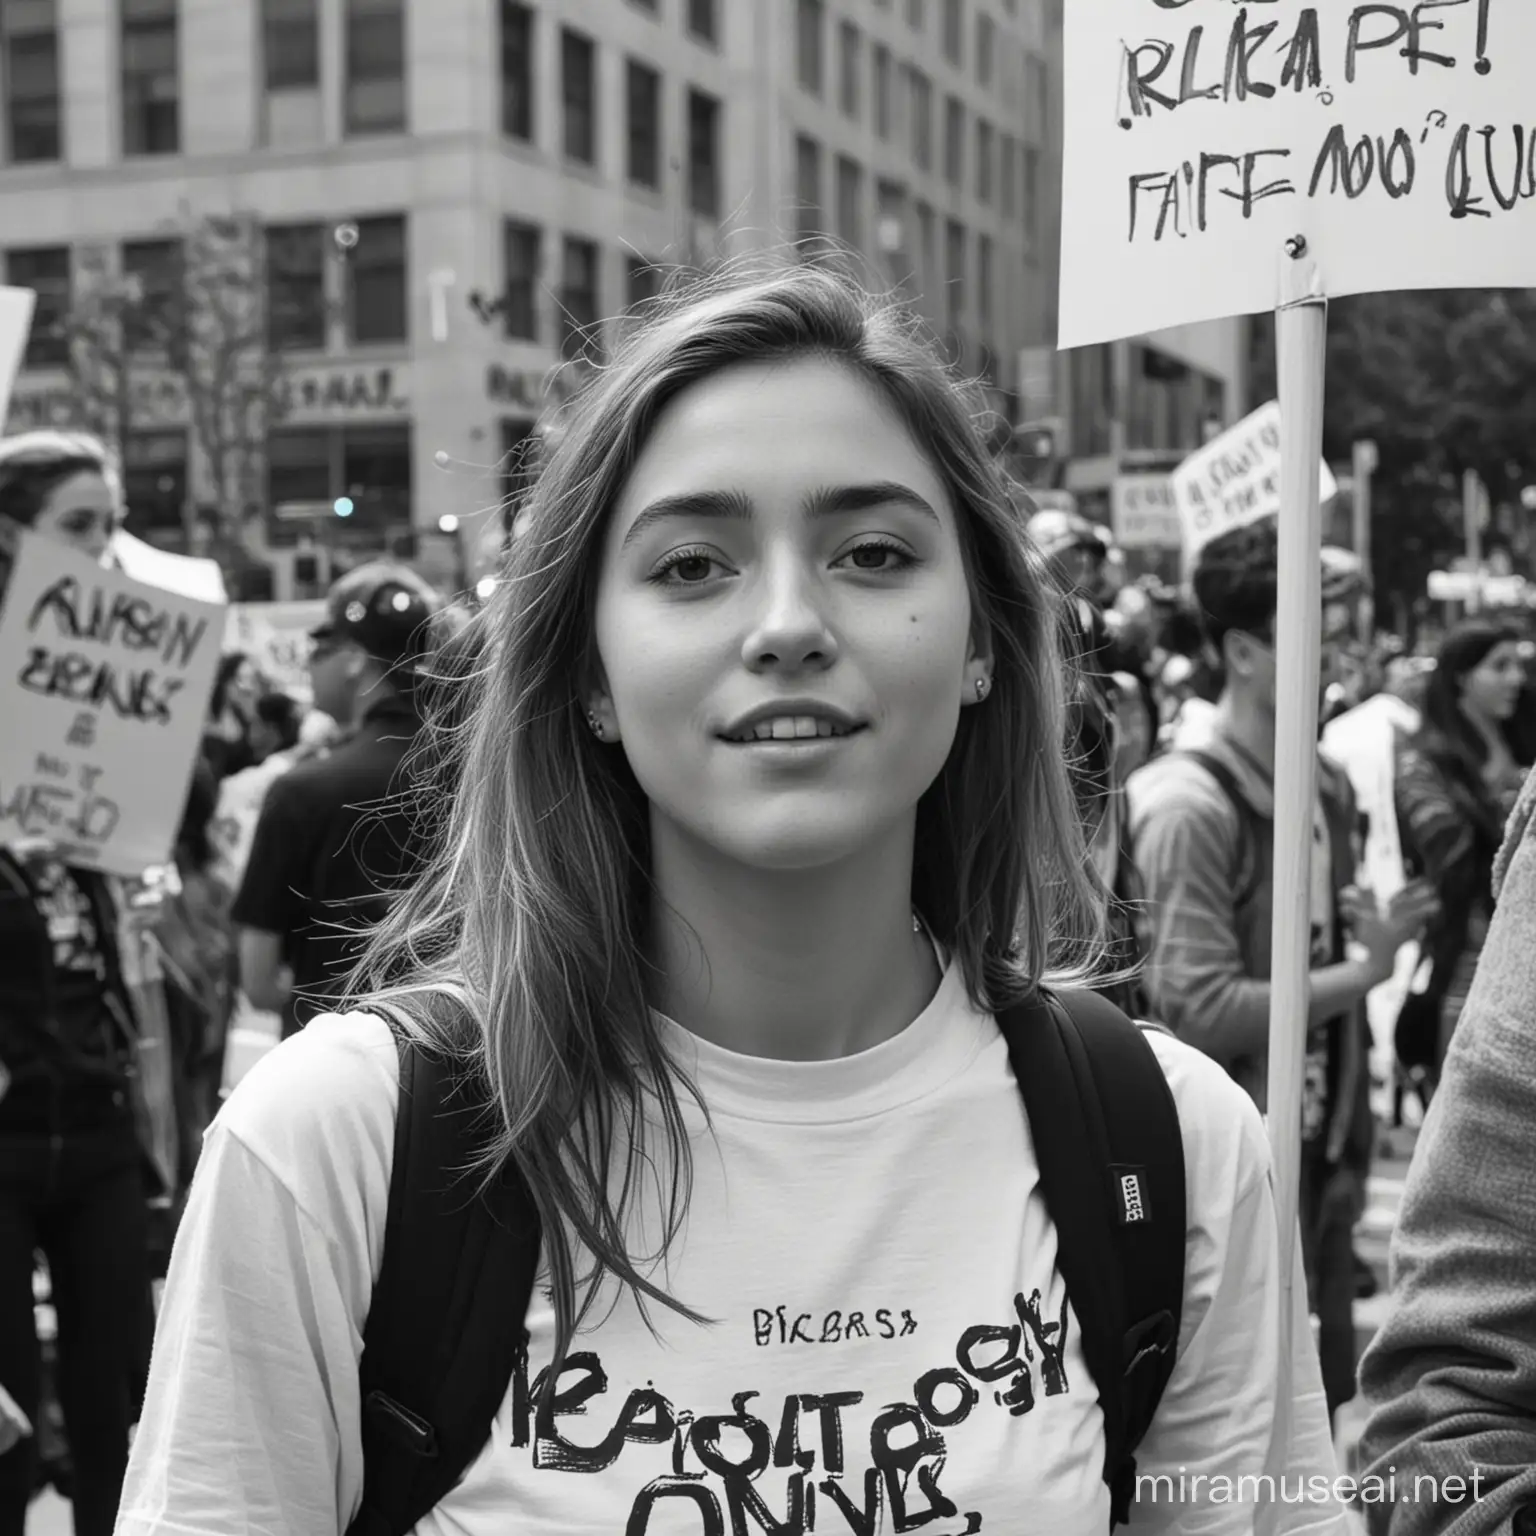 candid photo of a young woman at a protest Canon eos rebel t7